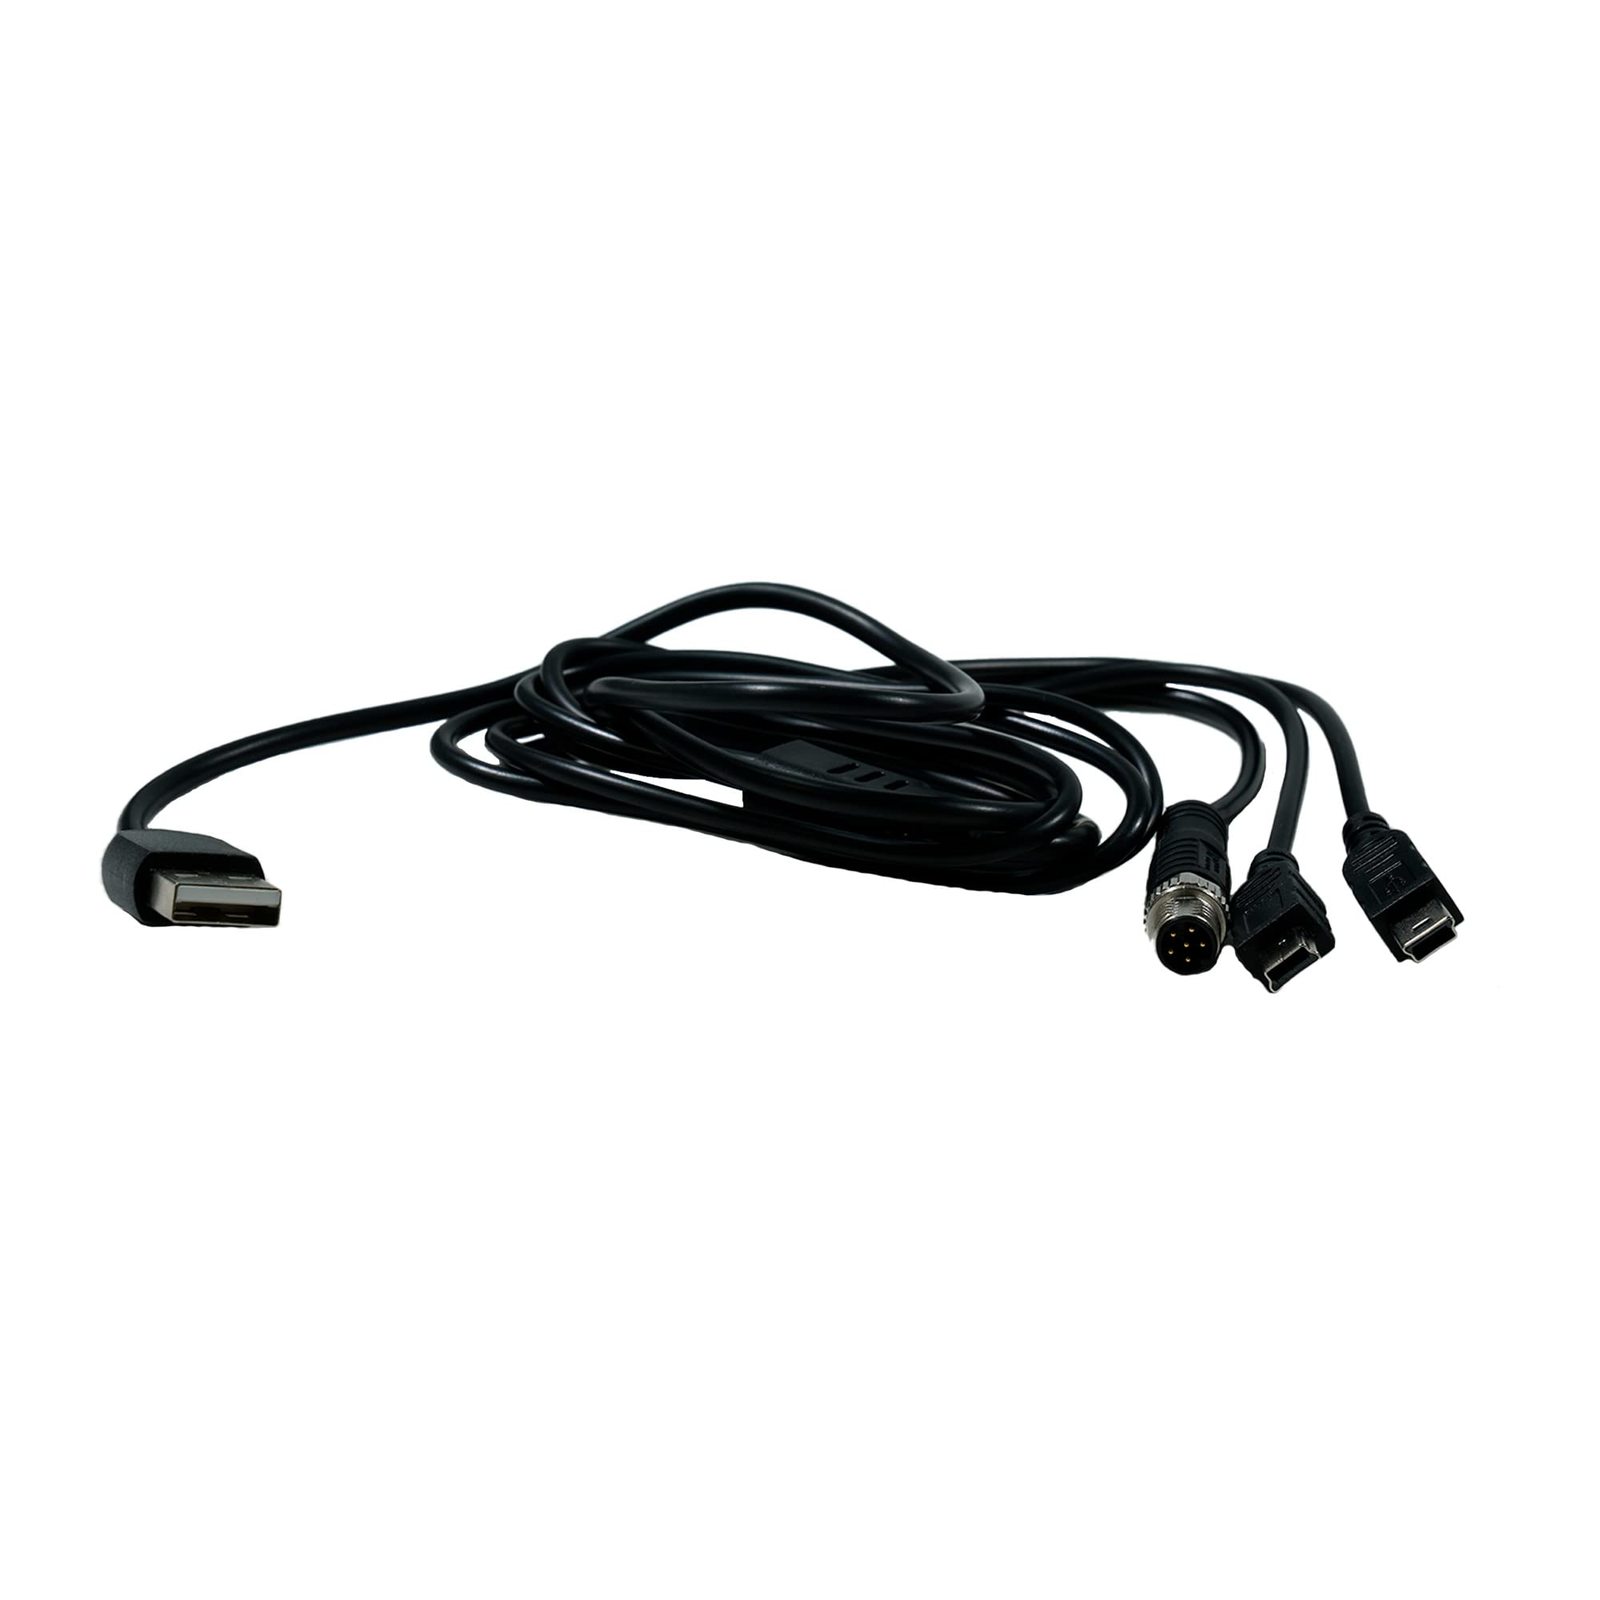 Primary image for XP Deus II Charging Cable - Charge RC, Coil, and Headphones